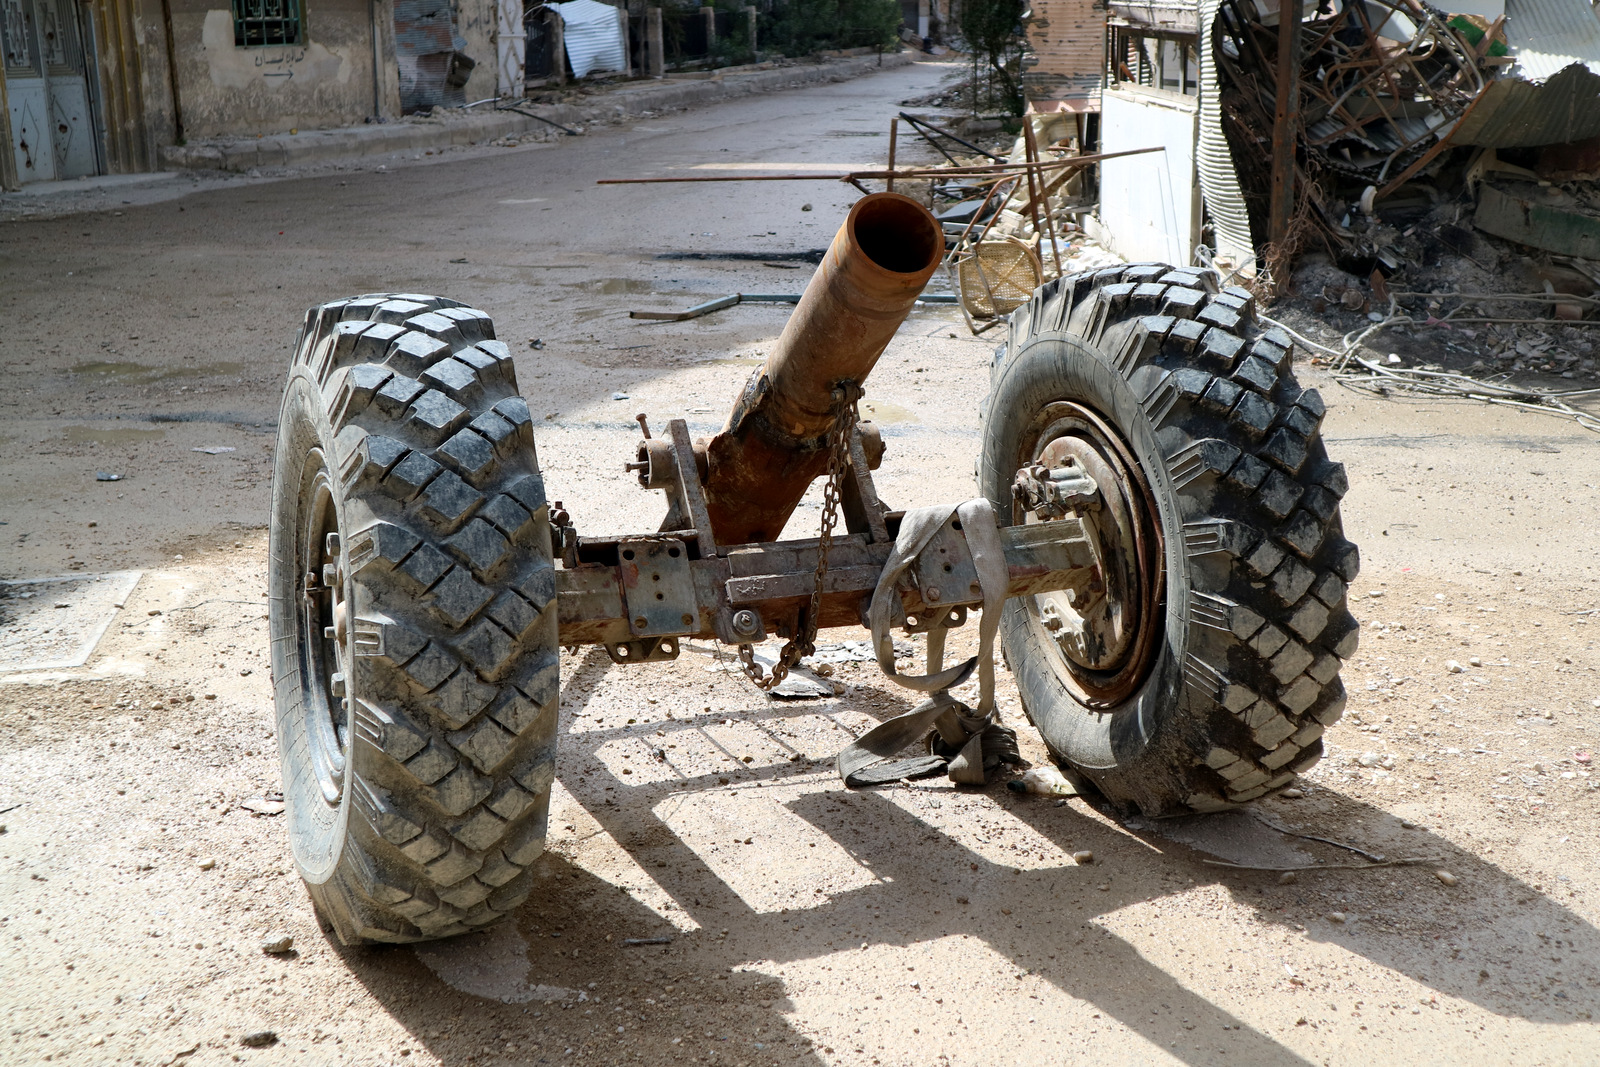 A mortar launcher left behind by rebels in Eastern Ghouta. The freshly liberated district of Damascus was used as launching pad for indiscriminate shelling of Damascus by rebel groups. (Photo: © Bas Spliet) 